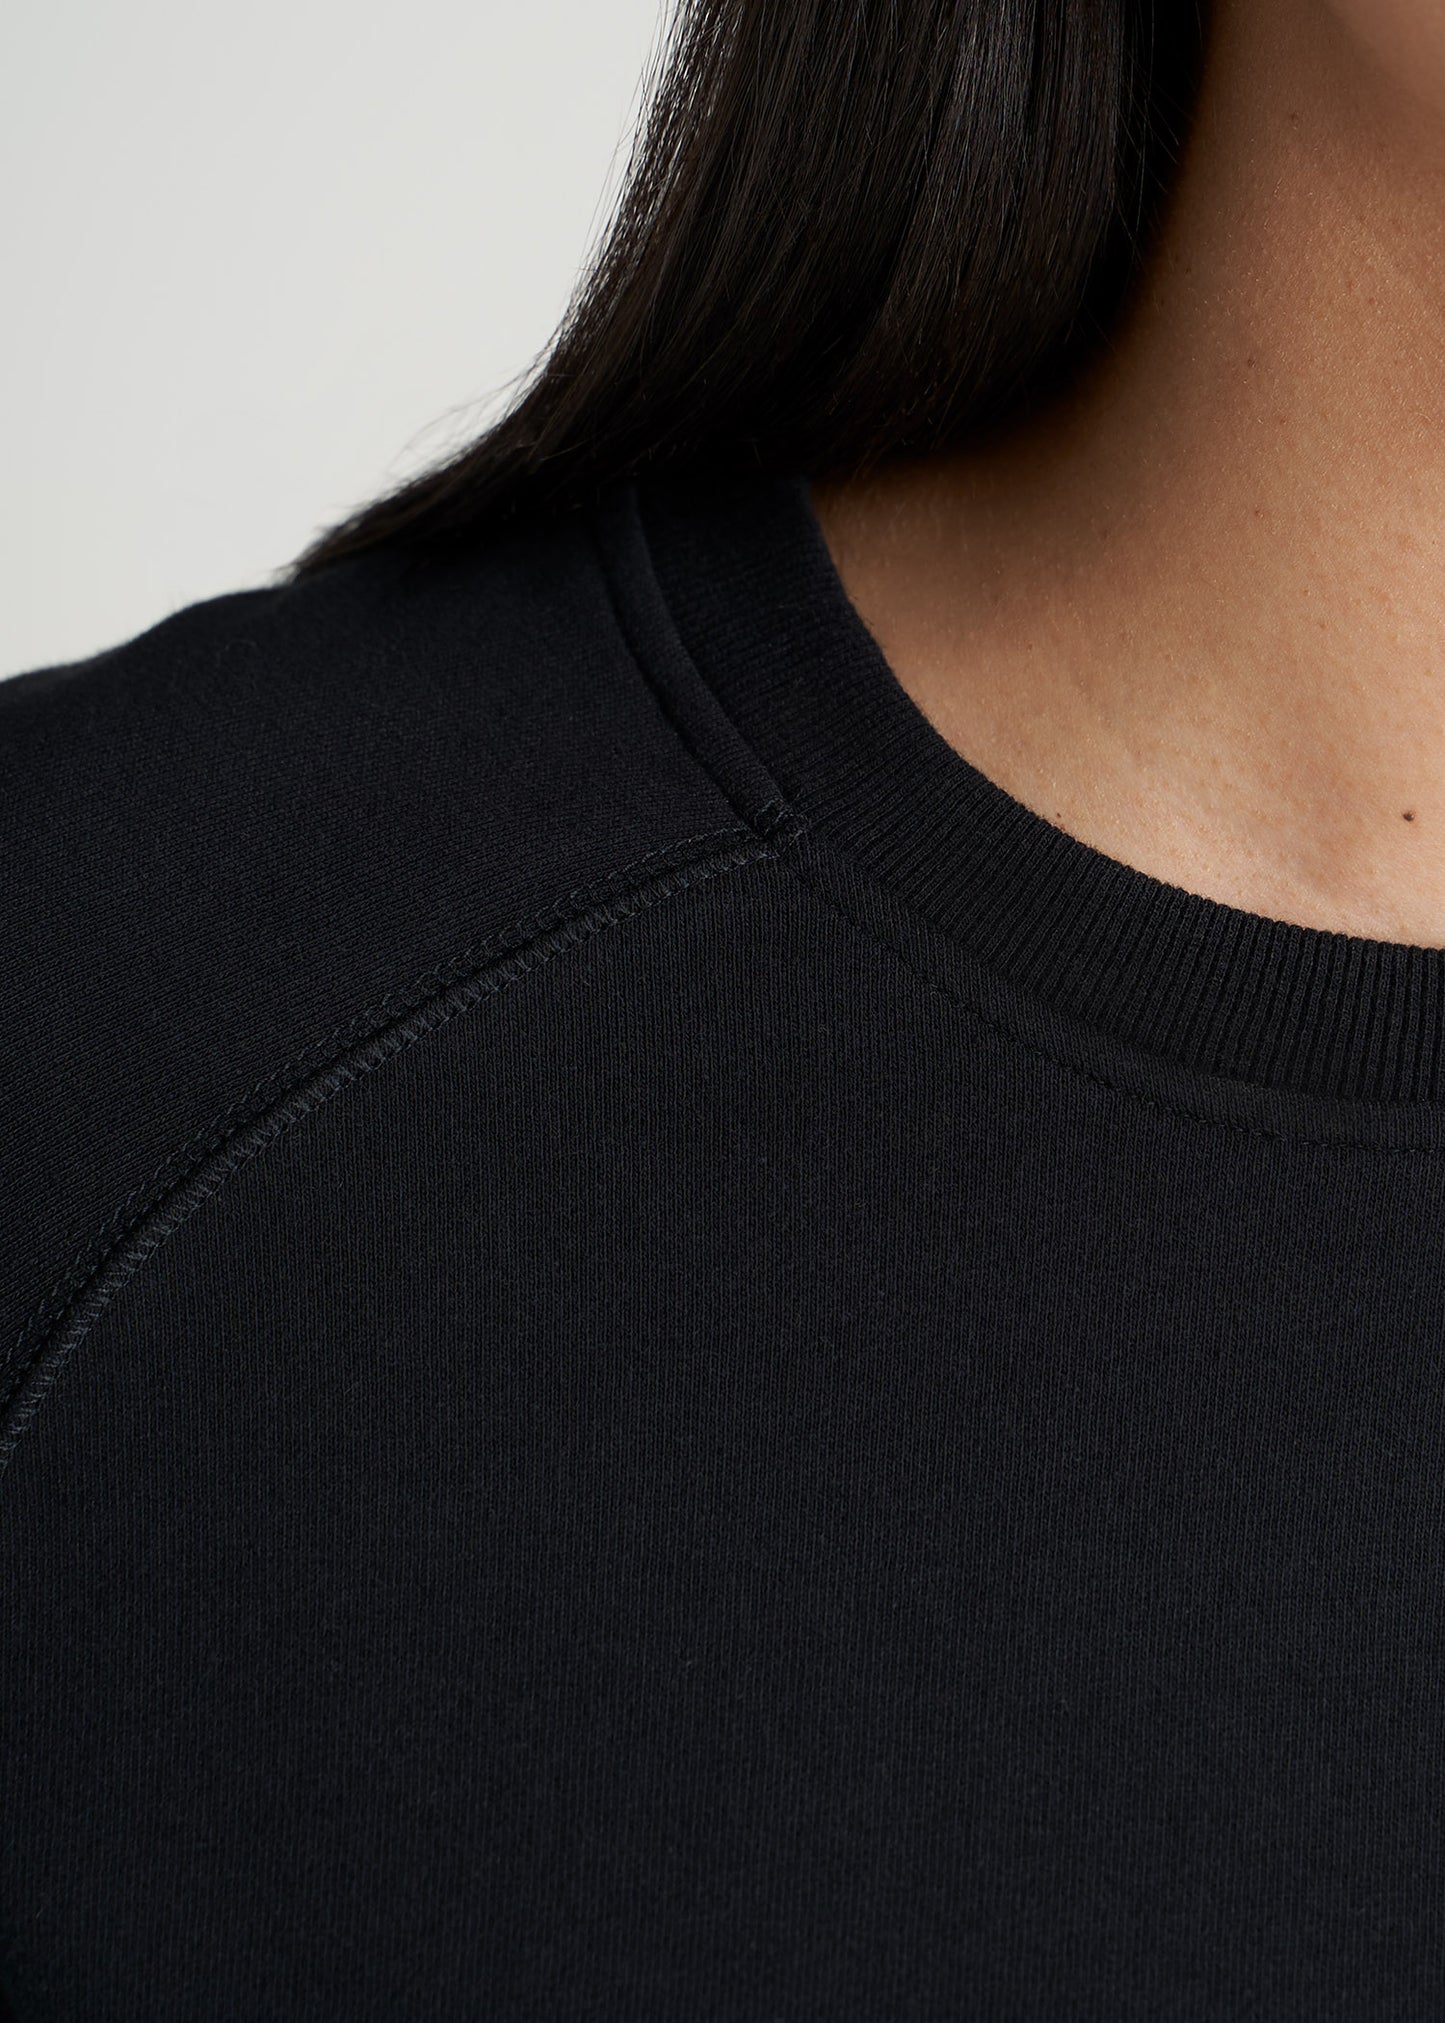 American-Tall-Women-Womens-FrenchTerry-CrewNeck-Black-detail